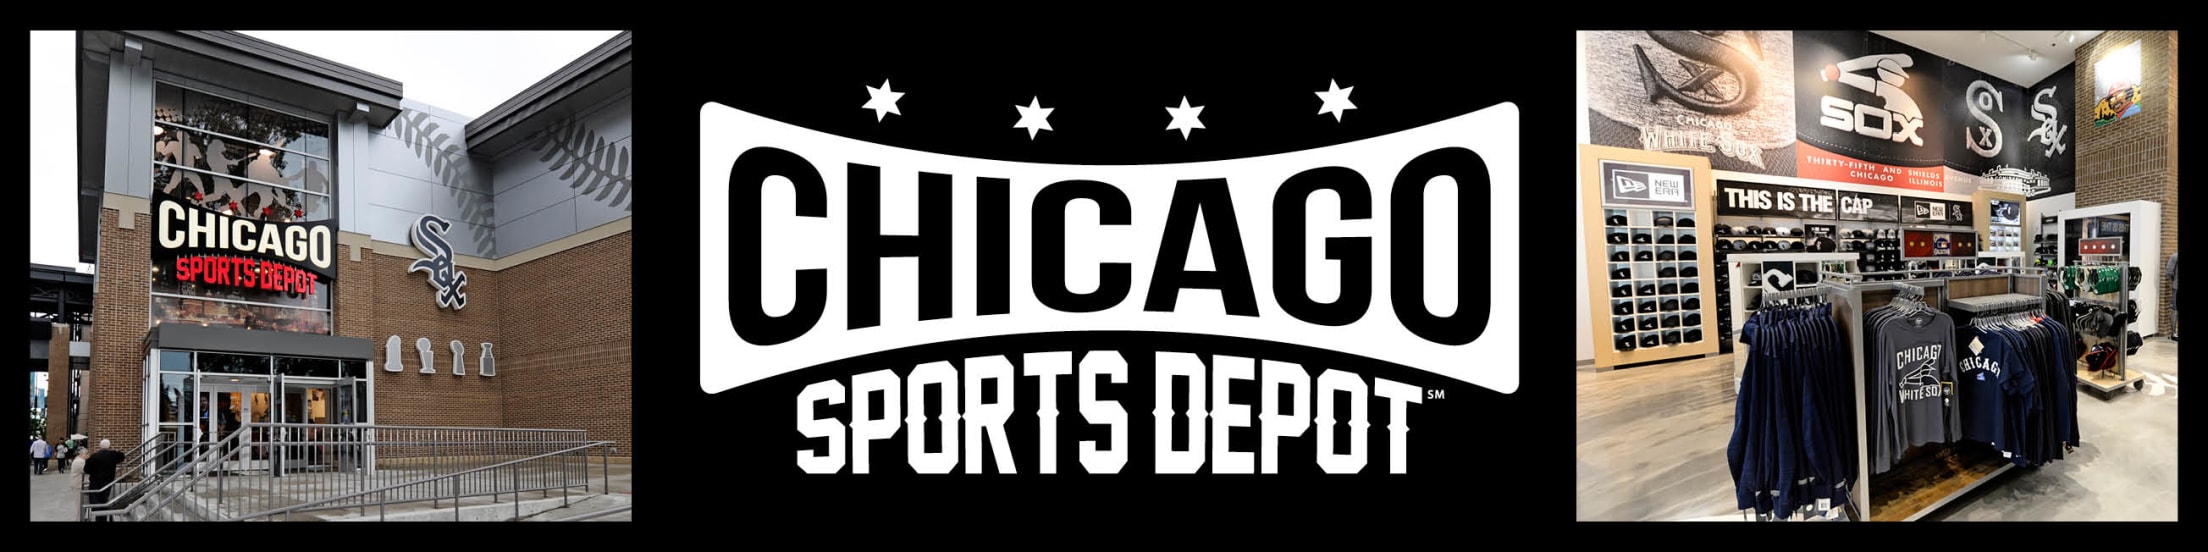 TEAM STORE & NAMING CONTEST, by Chicago White Sox